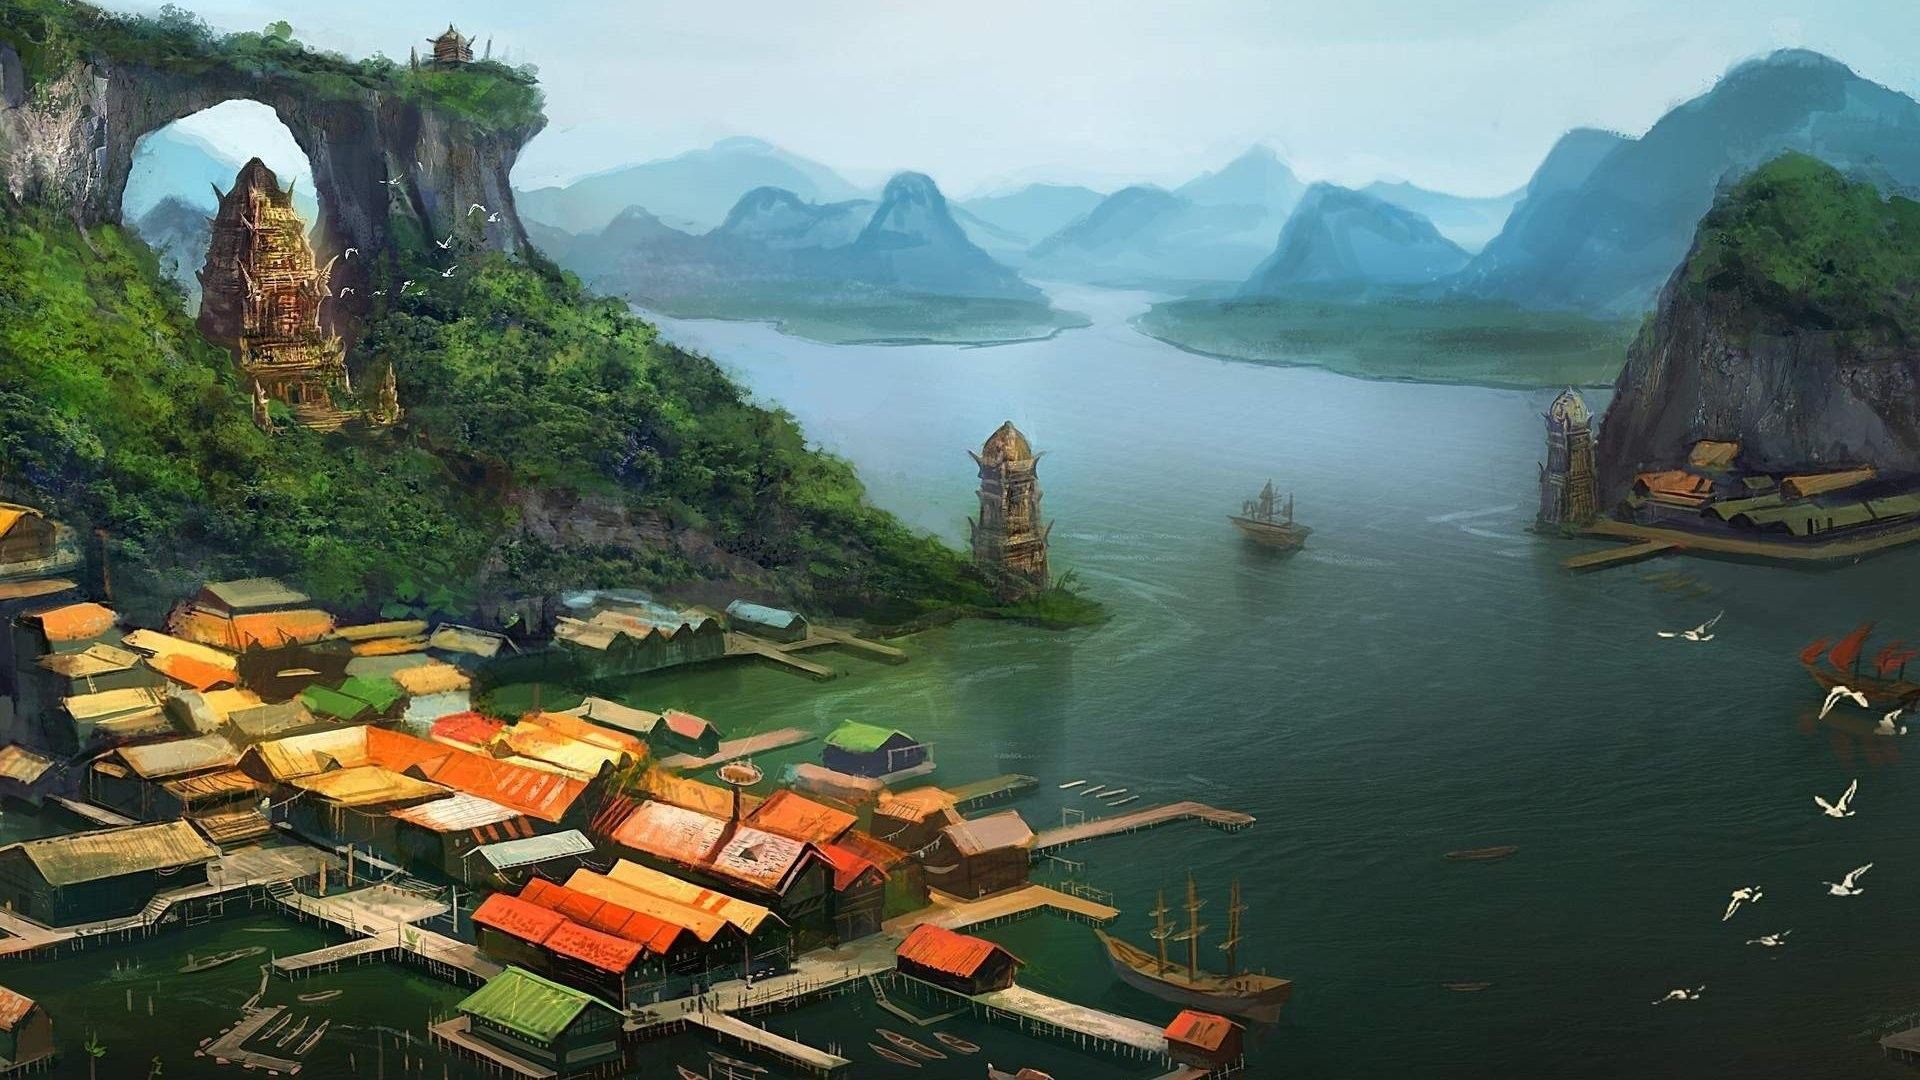 Lake, Ship, Architecture, digital, Tower, Trees, Artwork, Building, Mountains, Painting, Digital, Rooftops Fantasy, Architecture, Village, Ho